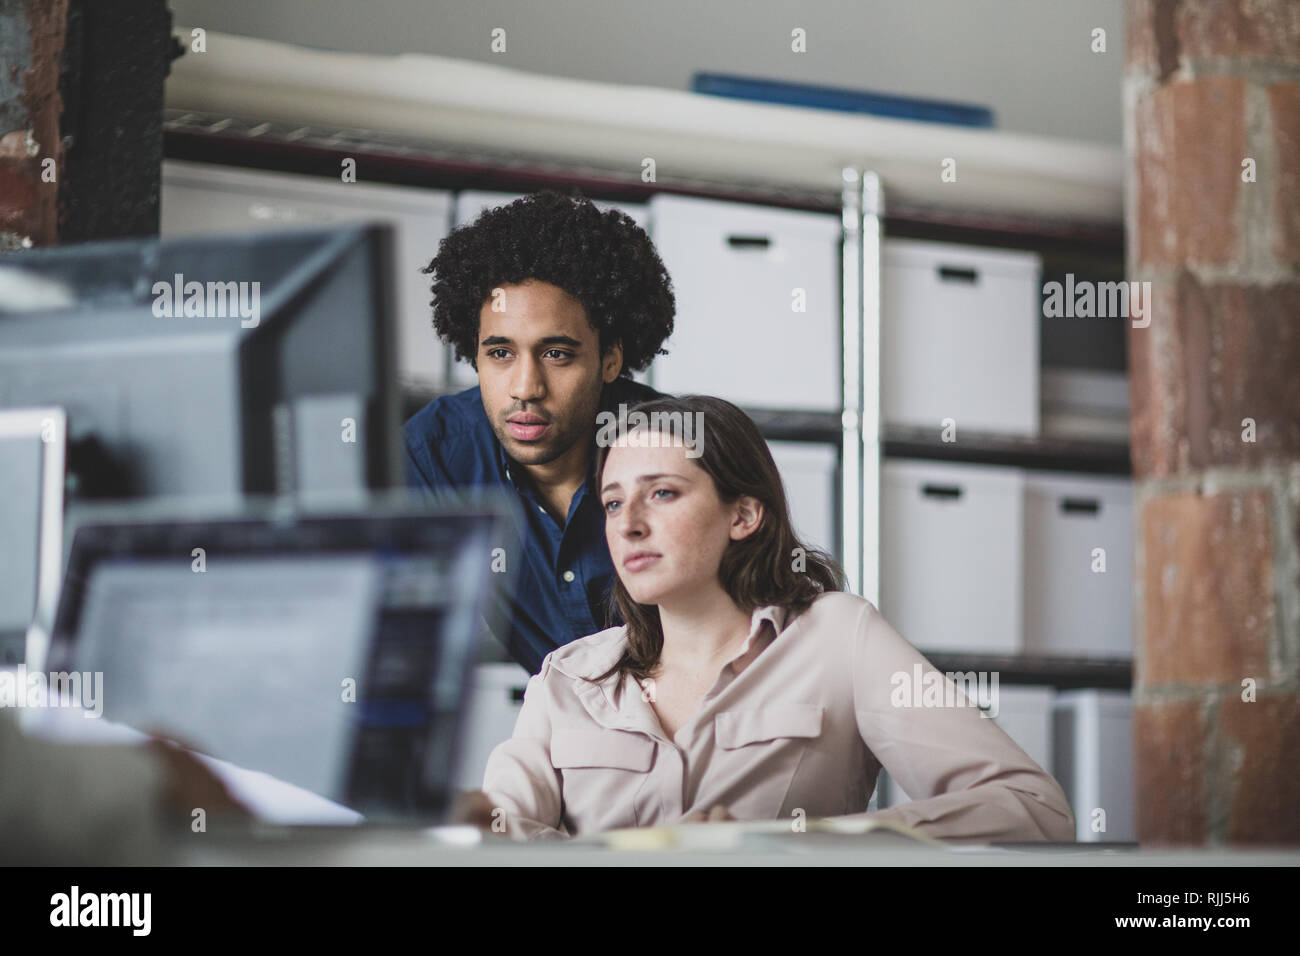 Coworkers looking at a desktop computer together Stock Photo